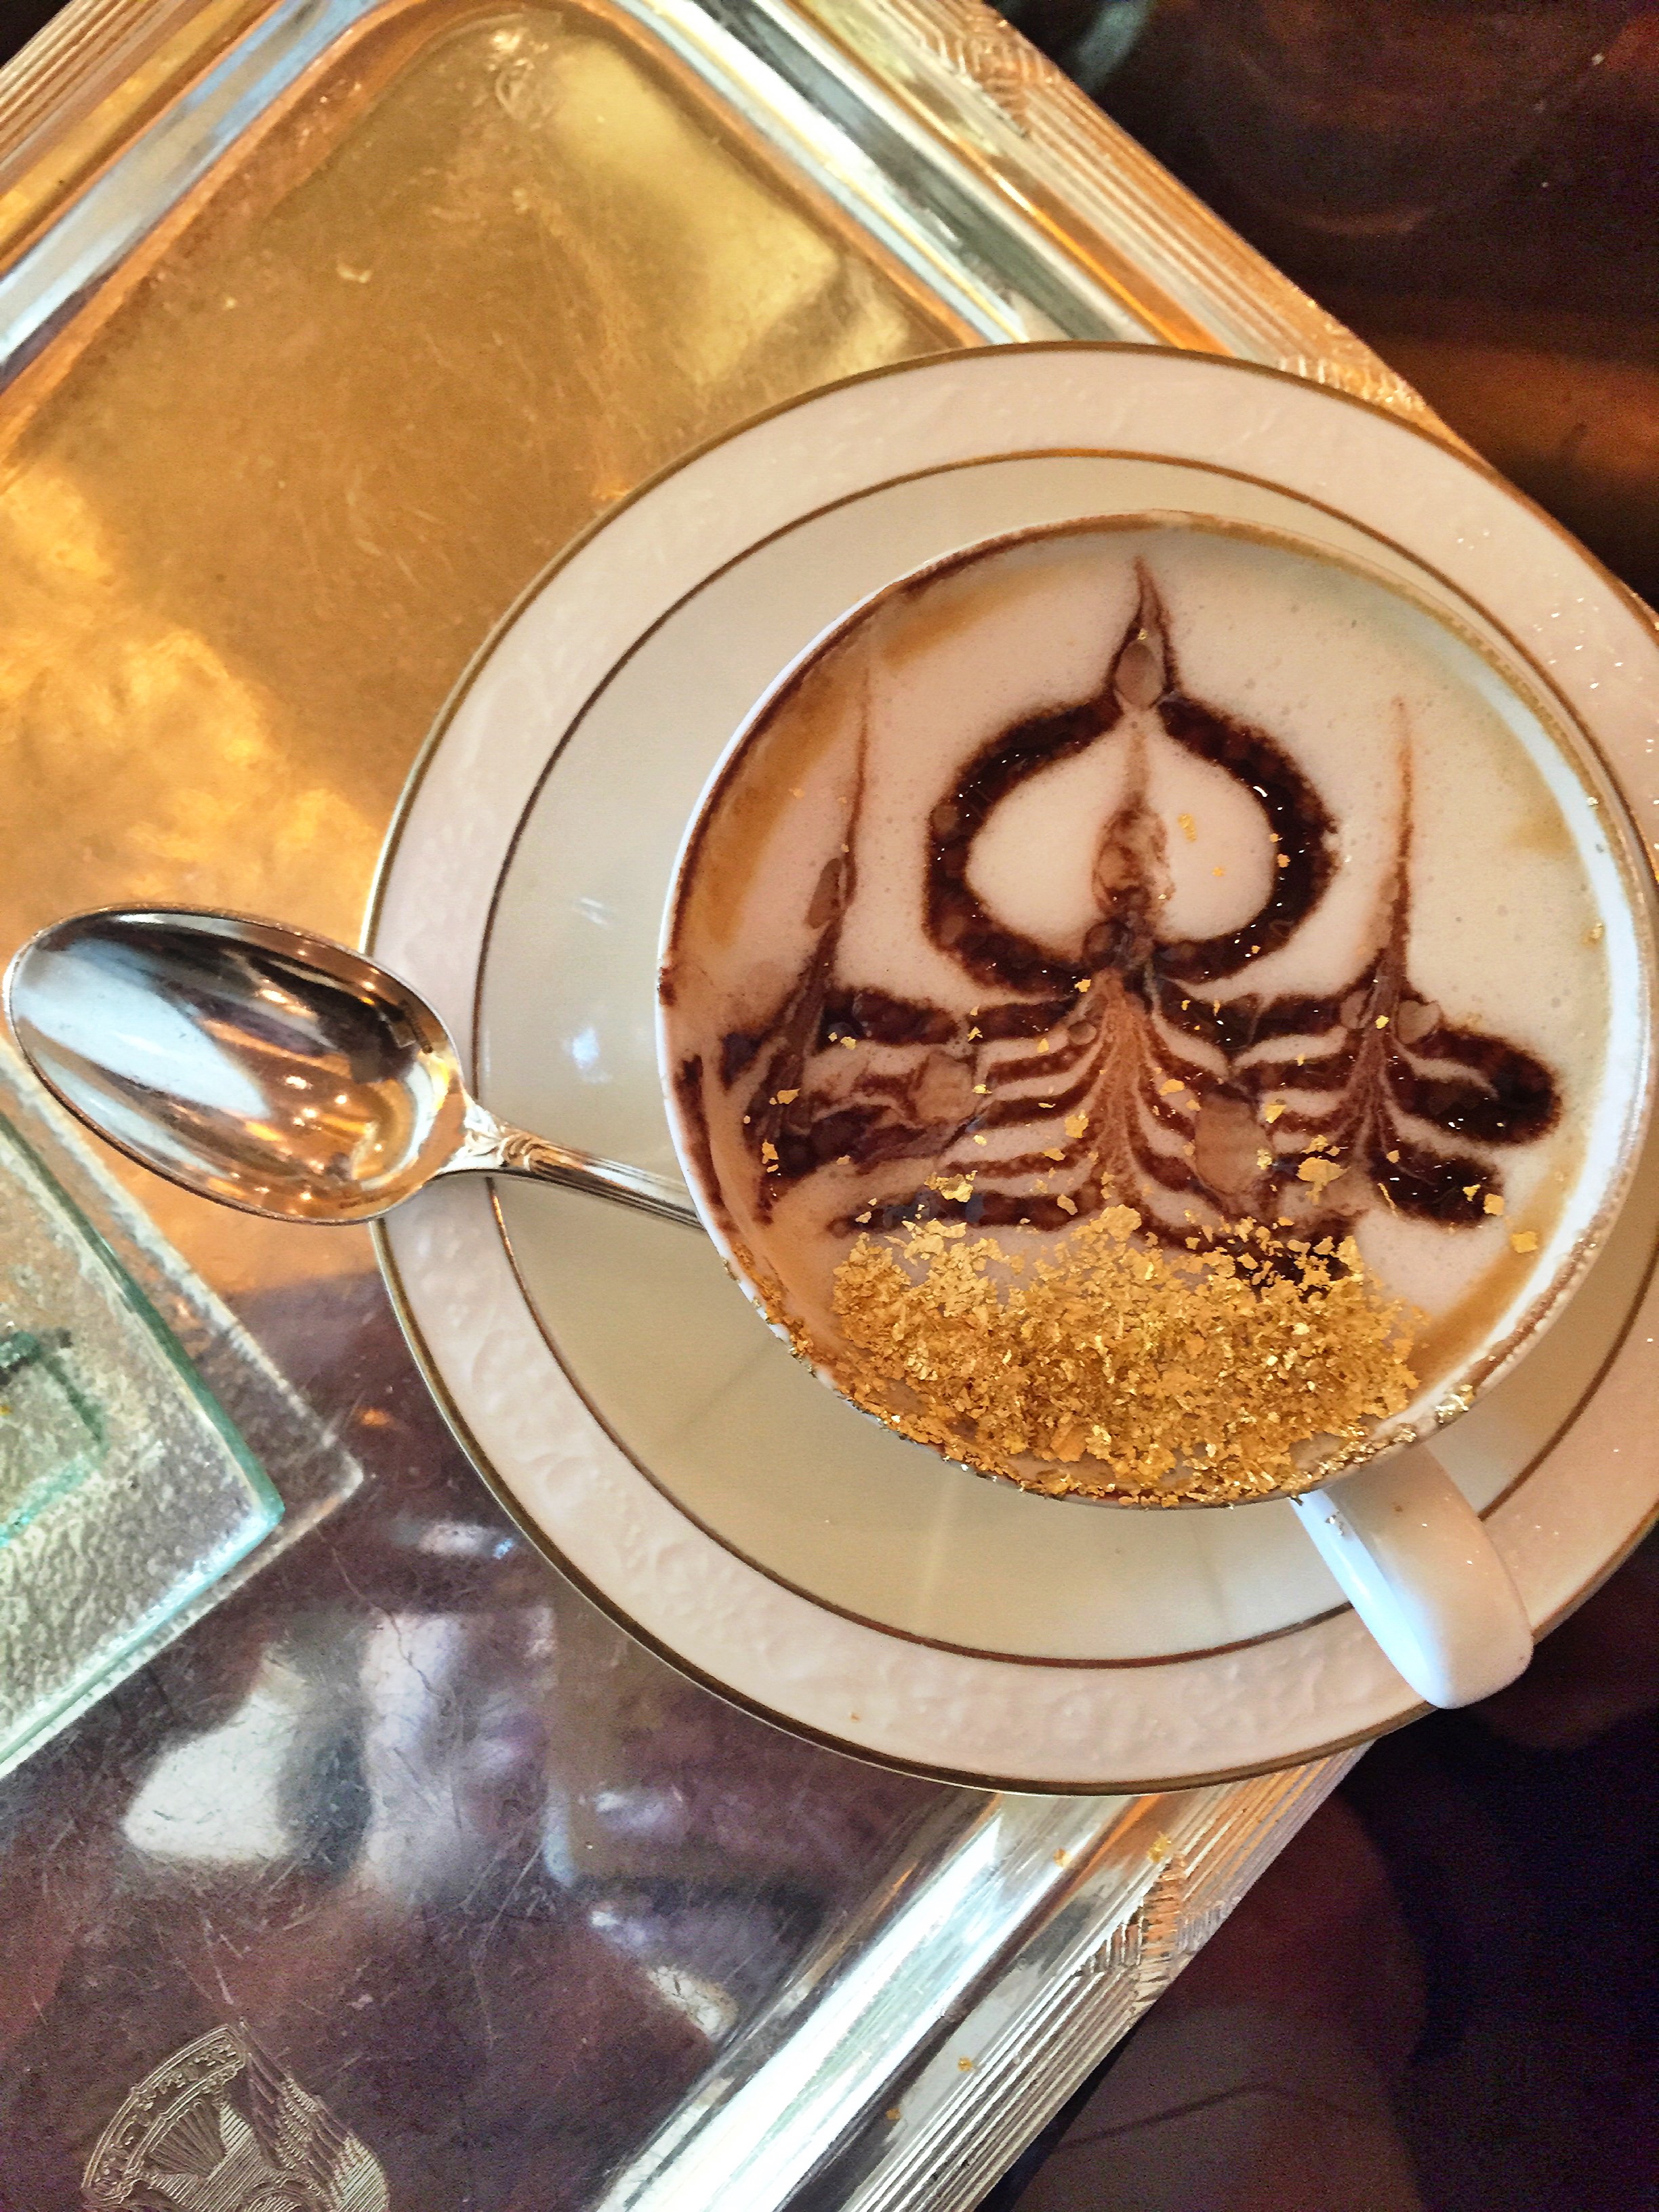 24k-gold-flakes-capuccino-emirates-palace